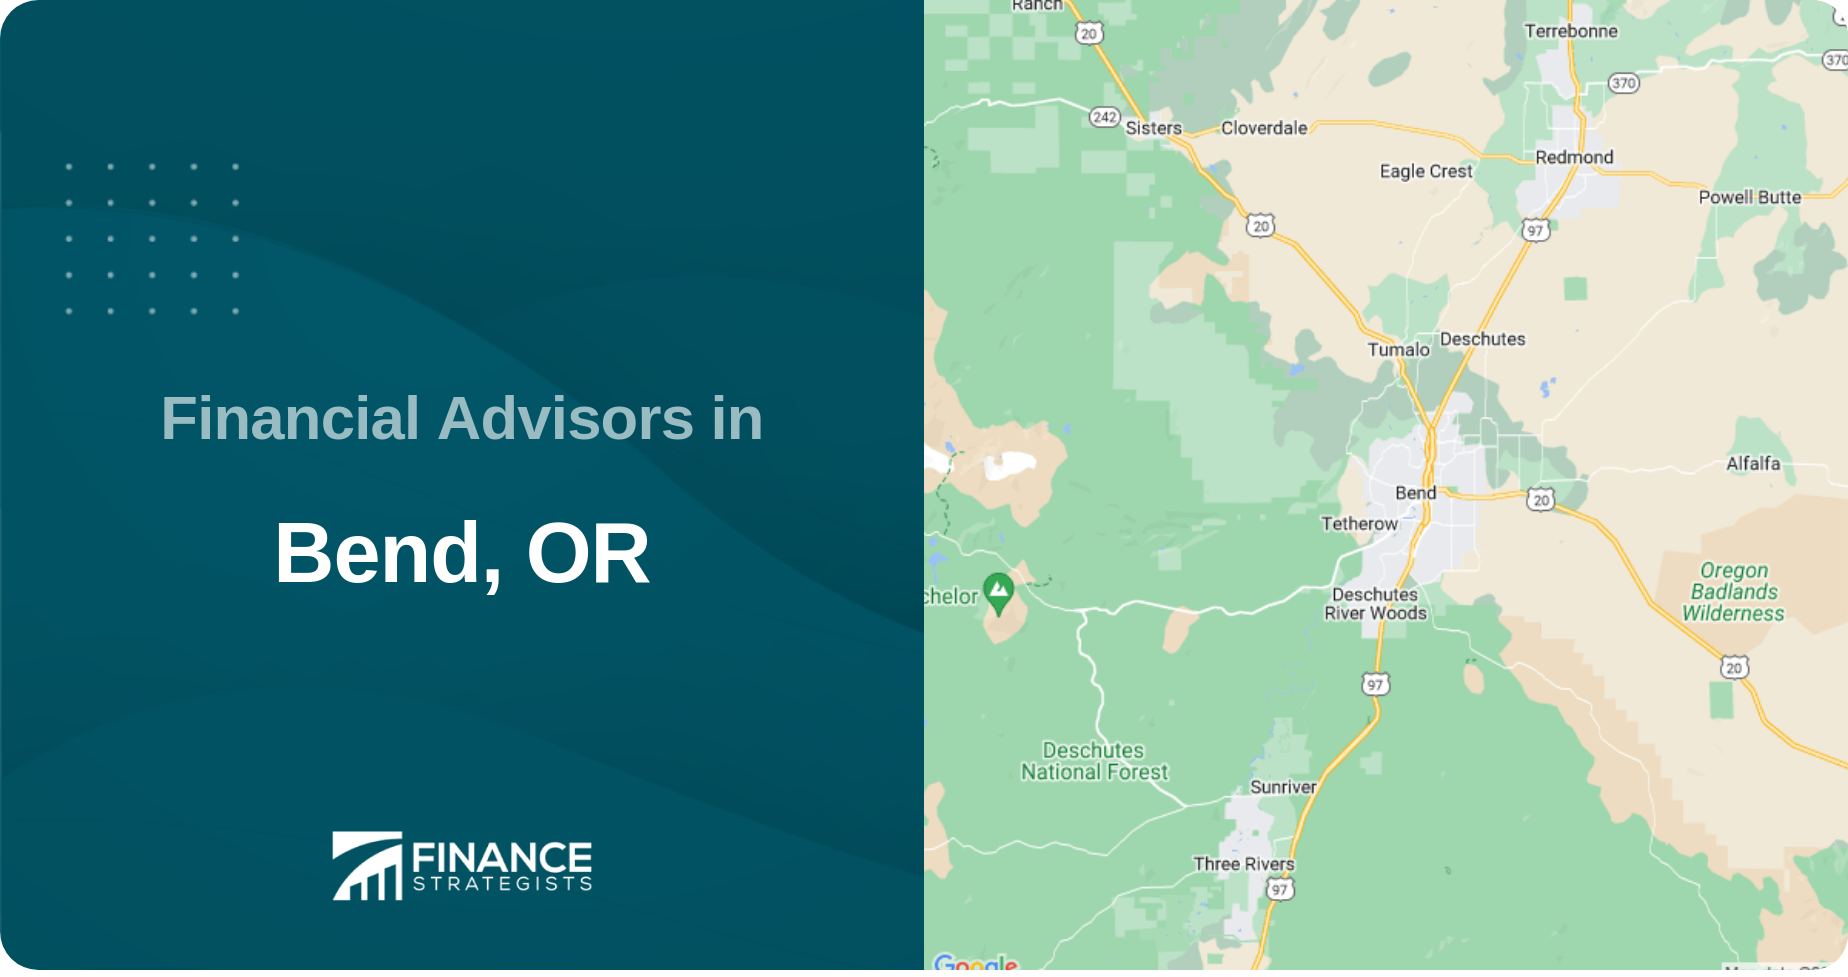 Financial Advisors in Bend, OR